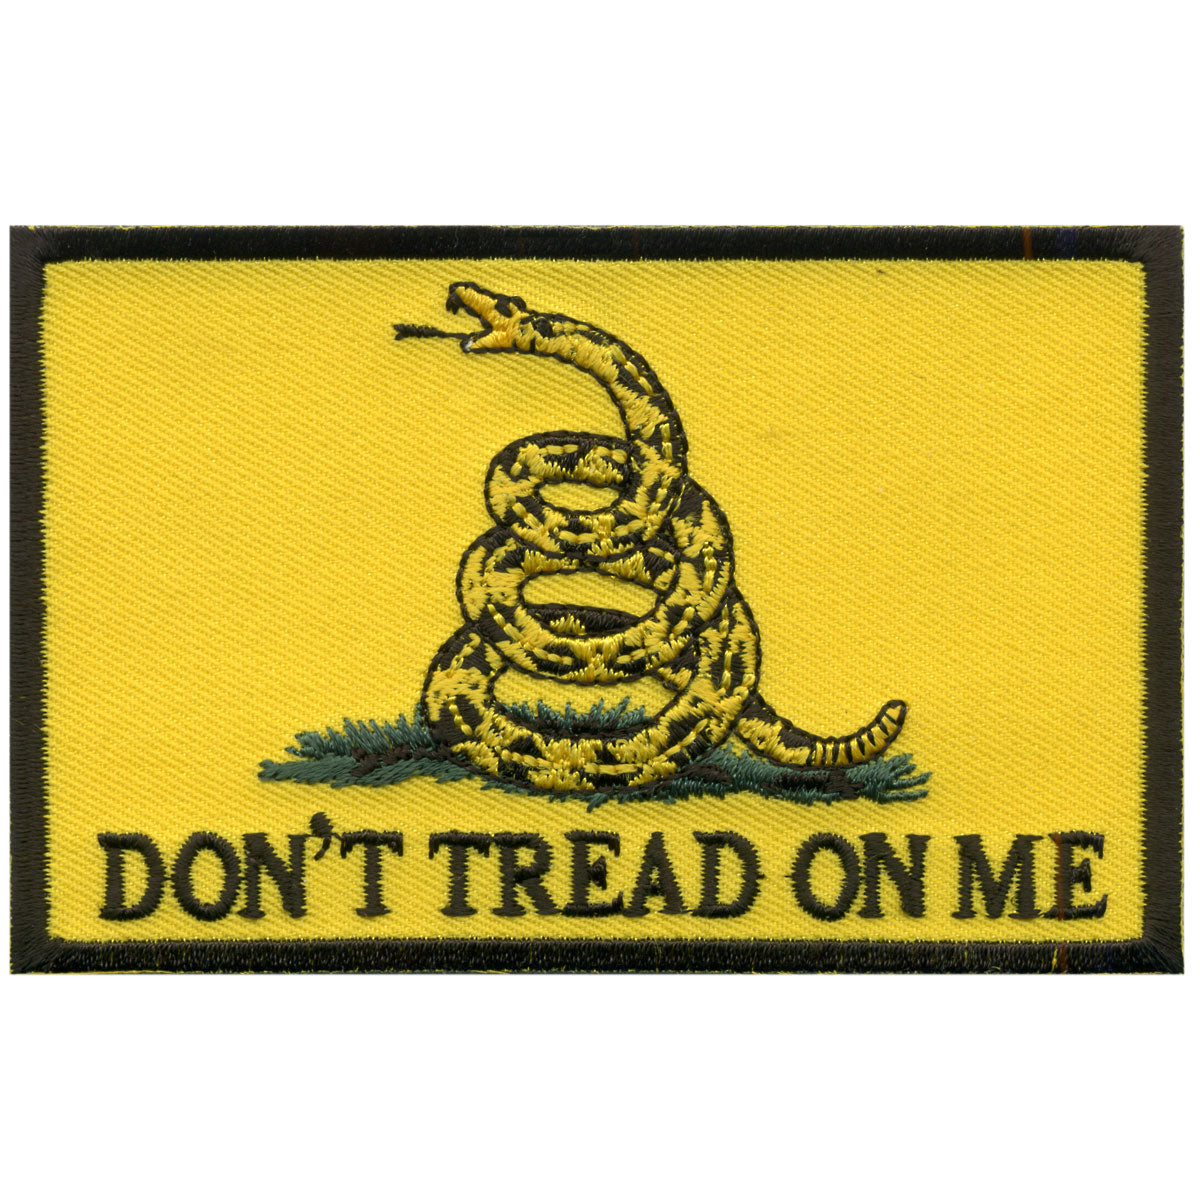 Hot Leathers PPV1002 Don't Tread On Me Hook Back 4" x 2.5" Patch